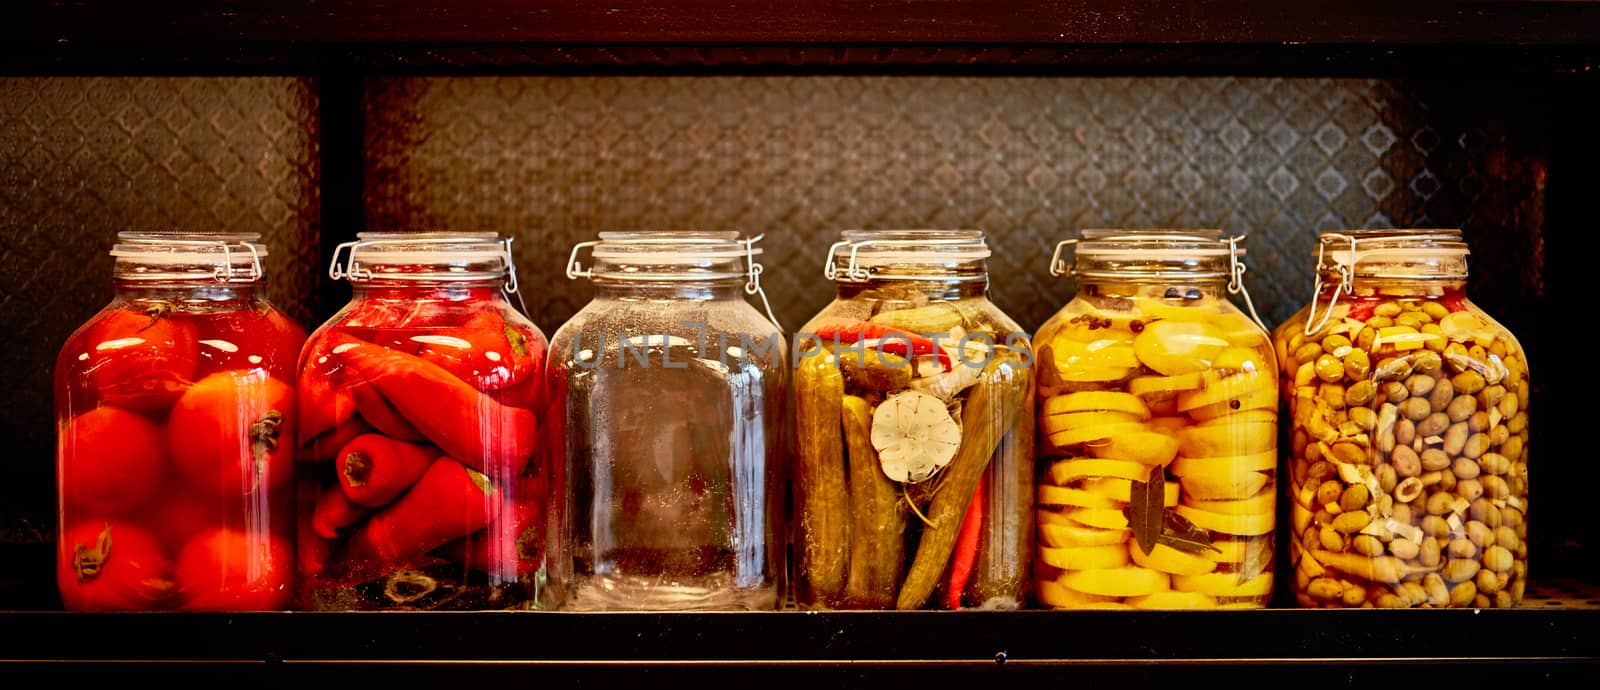 Jars with pickles in a food place, black background